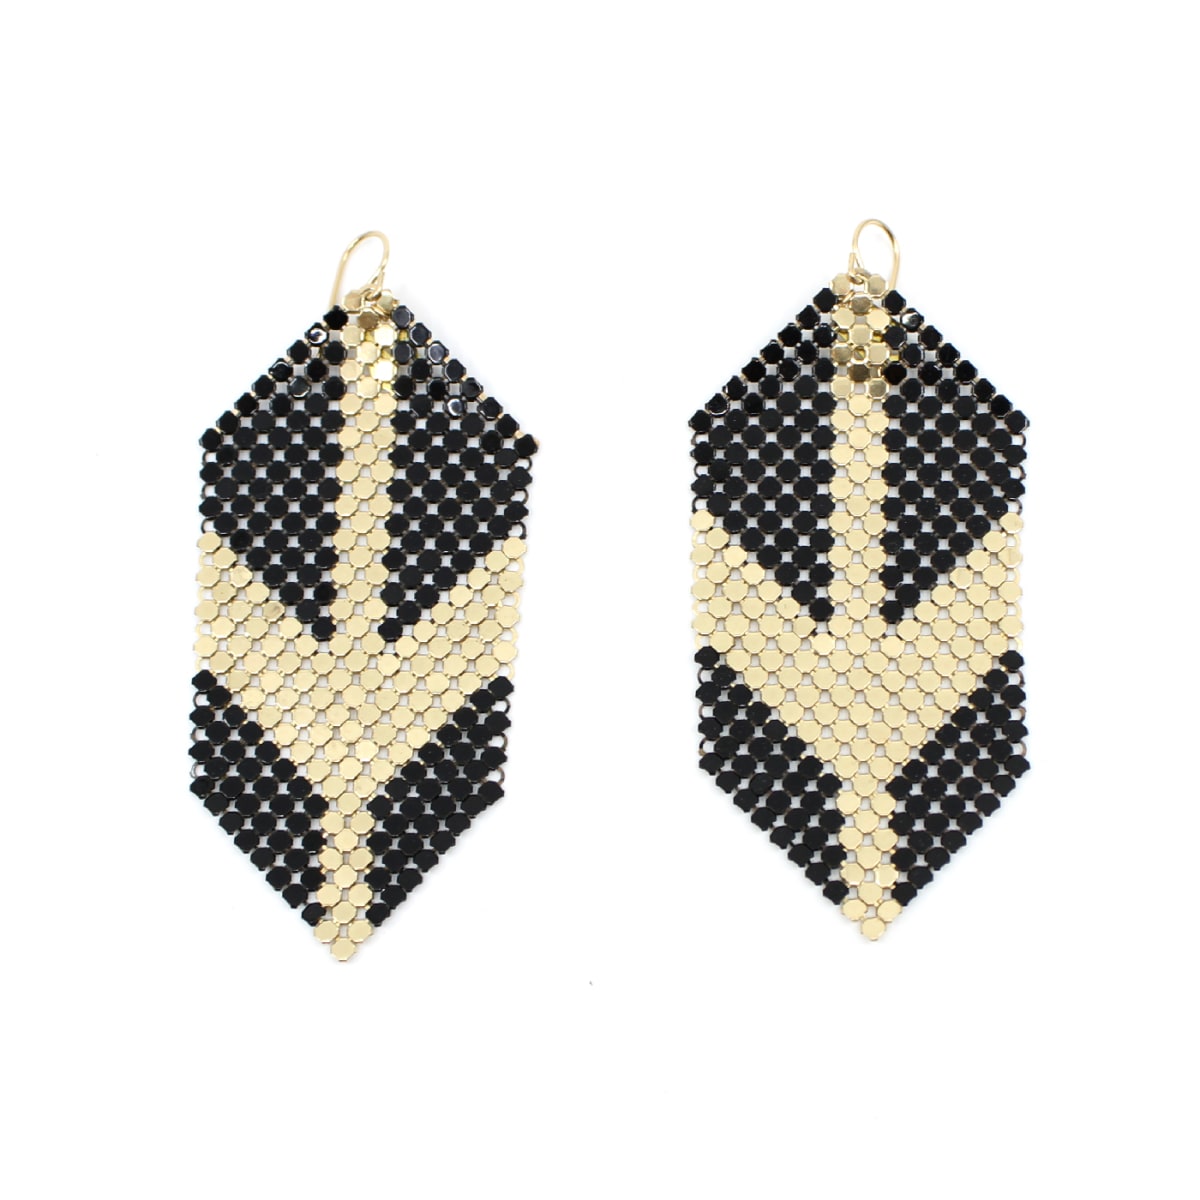 DECO GLAM ARROW EARRINGS by Maral Rapp  Image: Mod, geometric, panel earrings inset with bold, directional graphic. Hand-pieced of black and gold mesh from two vintage purses